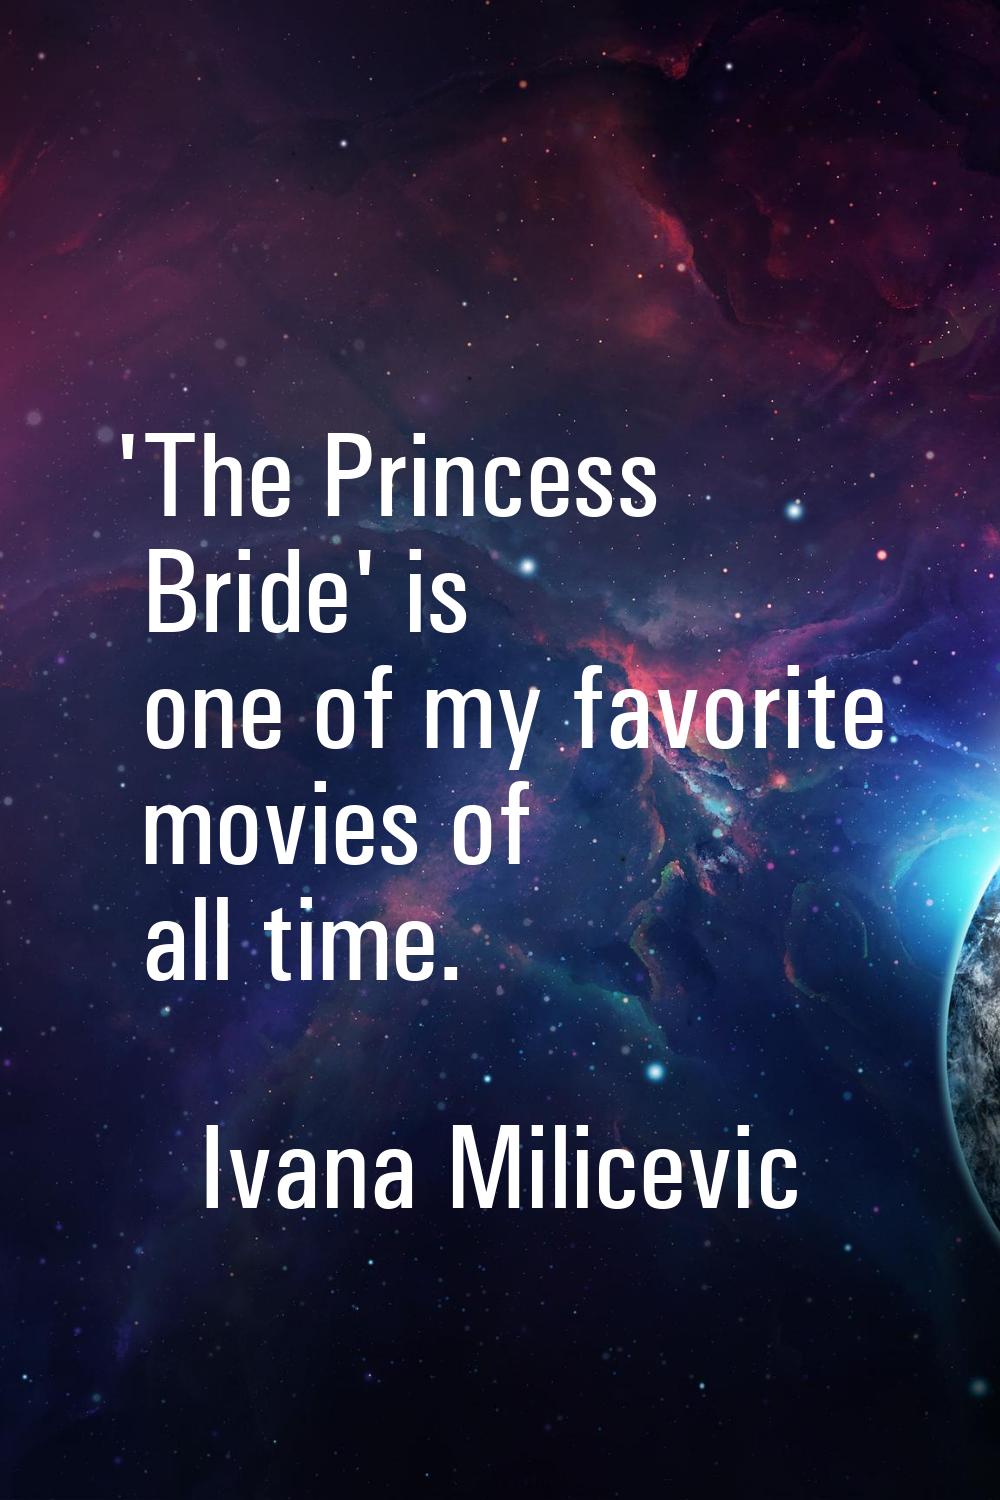 'The Princess Bride' is one of my favorite movies of all time.